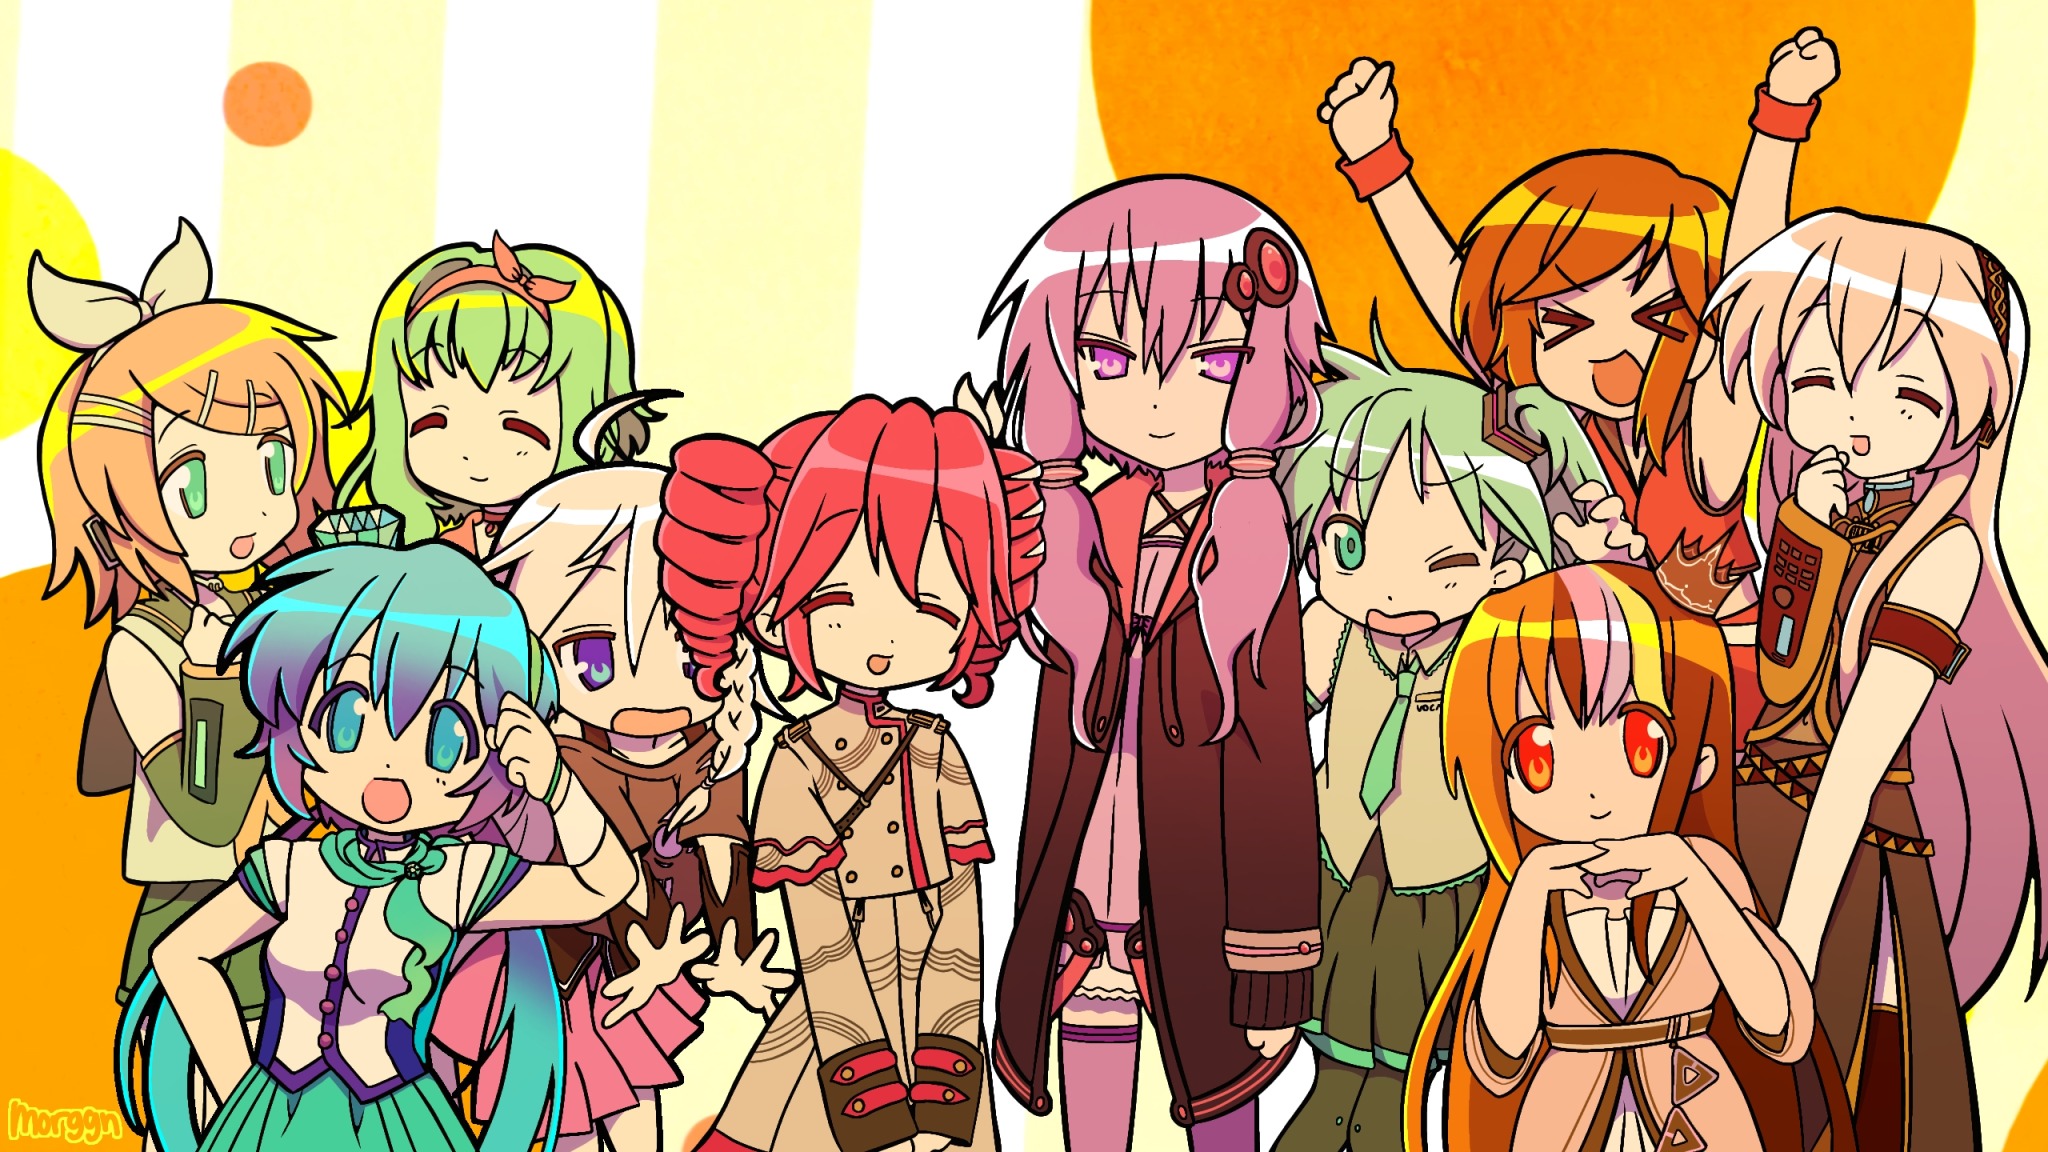 A screenshot redraw of Lucky Star, featuring Vocaloid and Synthesizer V characters. From left to right: Rin, Gumi, Lapis, IA, Teto, Yukari, Miku, Galaco, Meiko, and Luka.